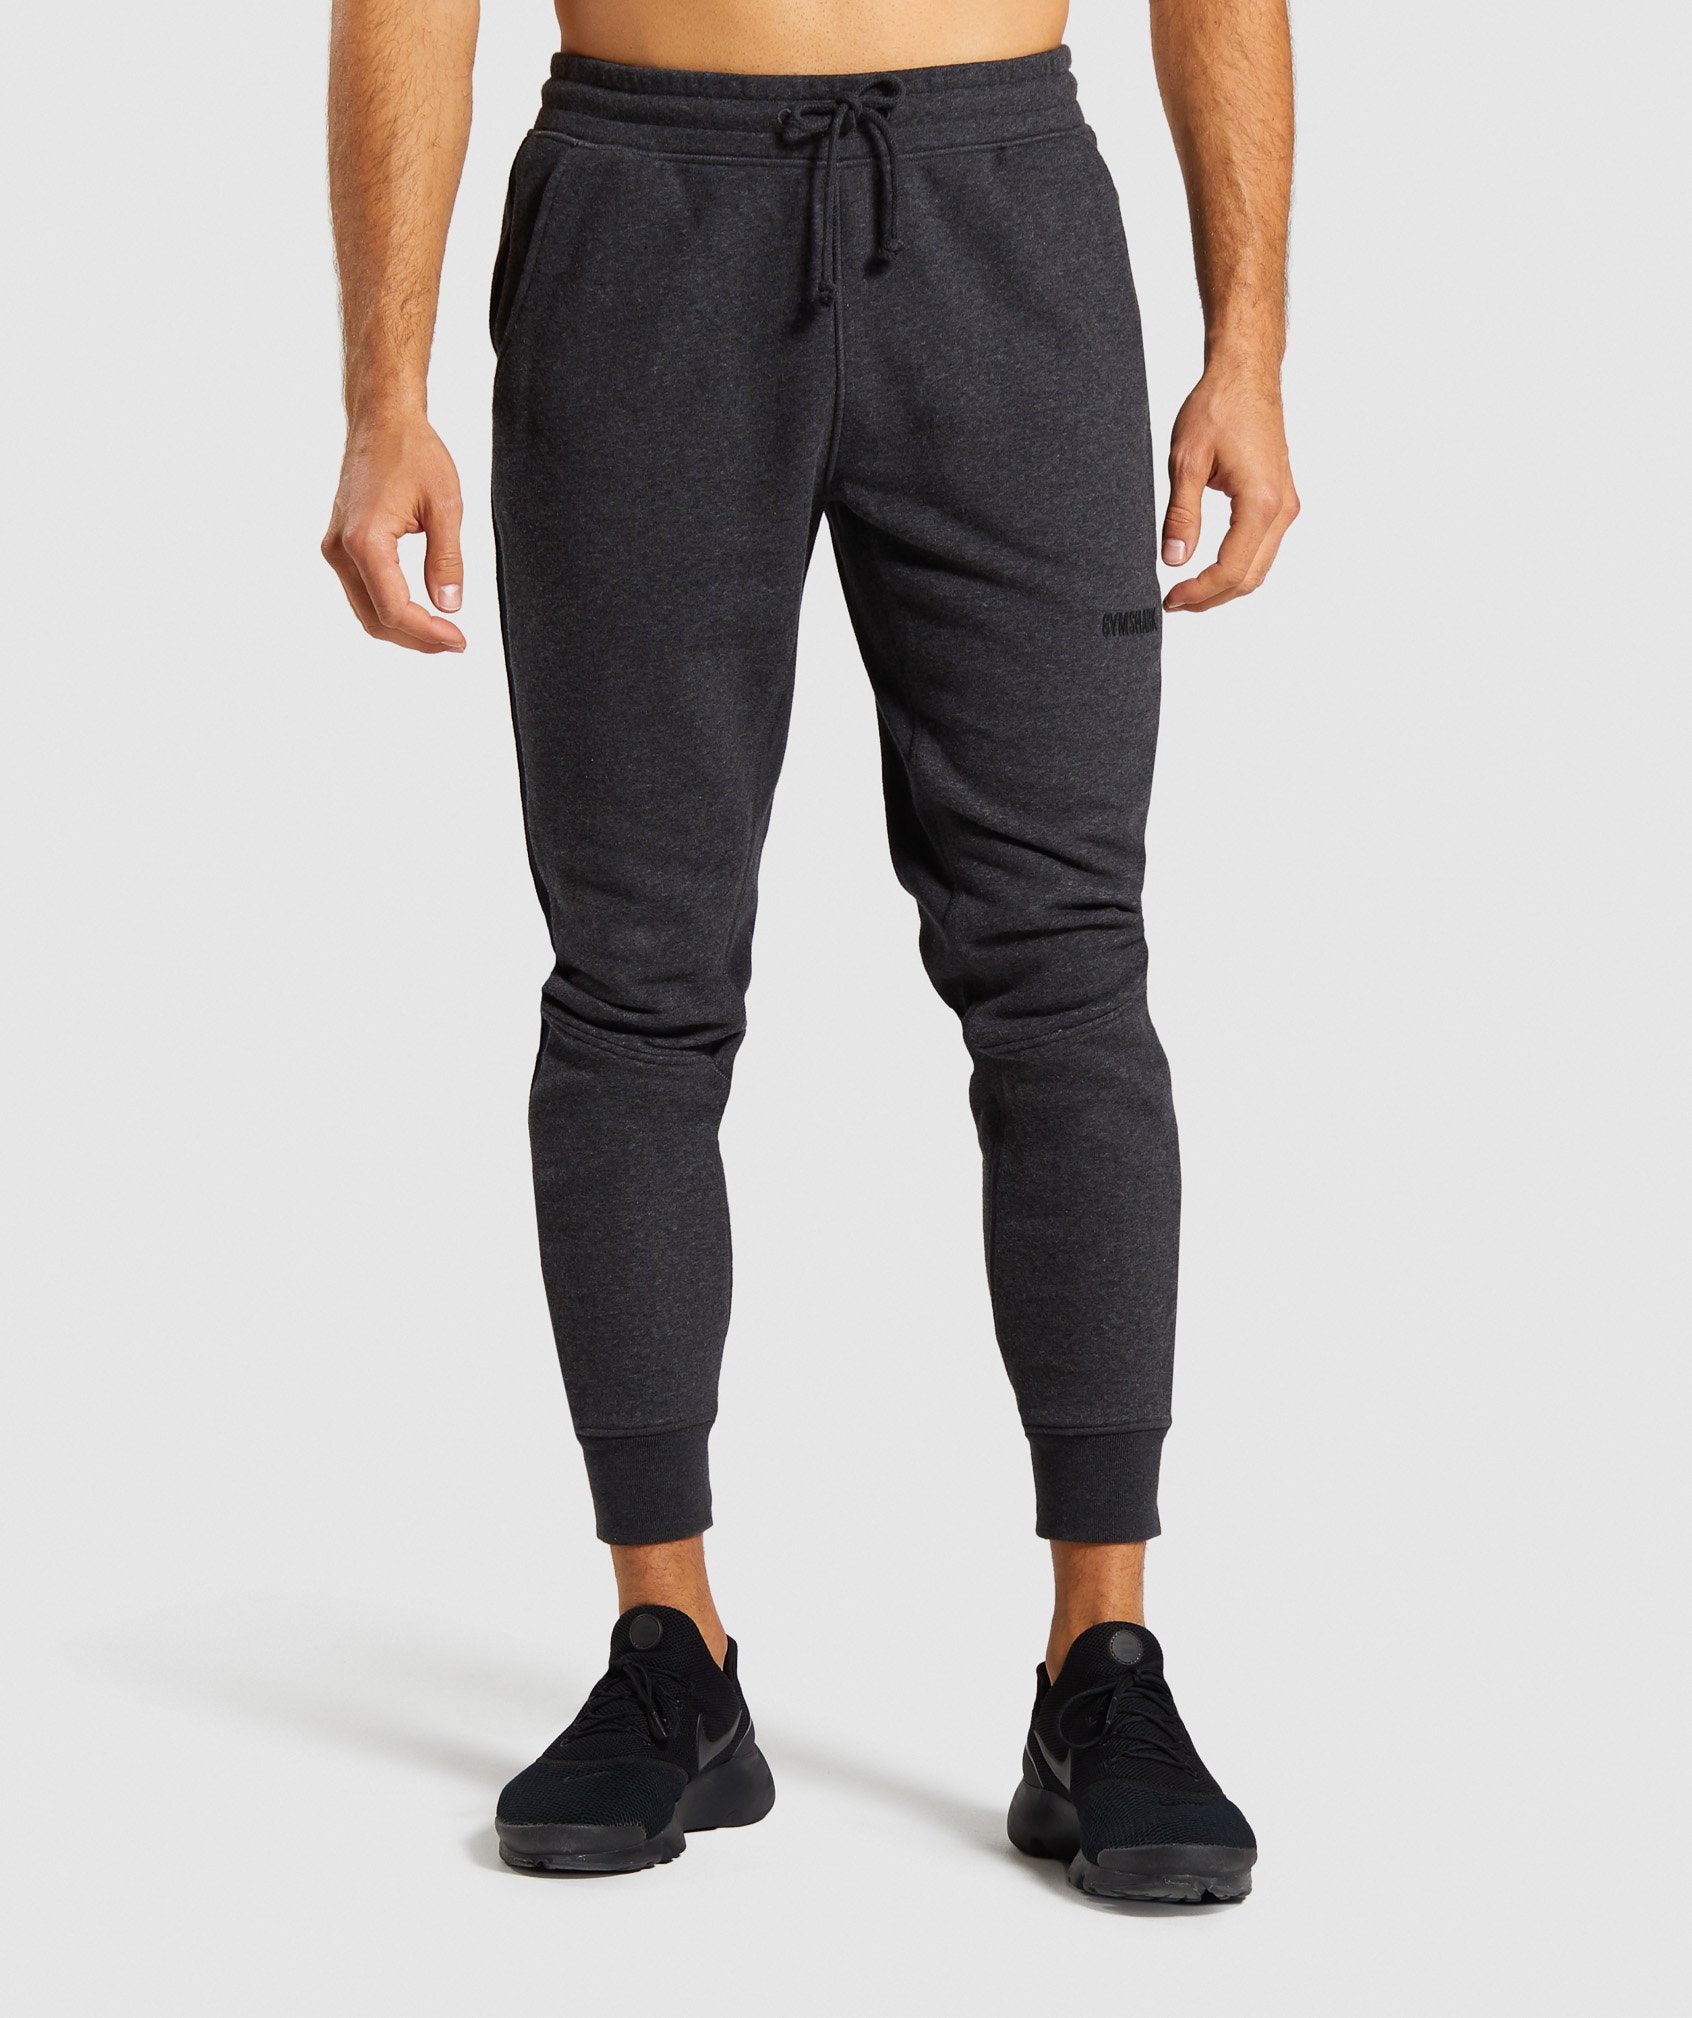 Compound Joggers in Black Marl